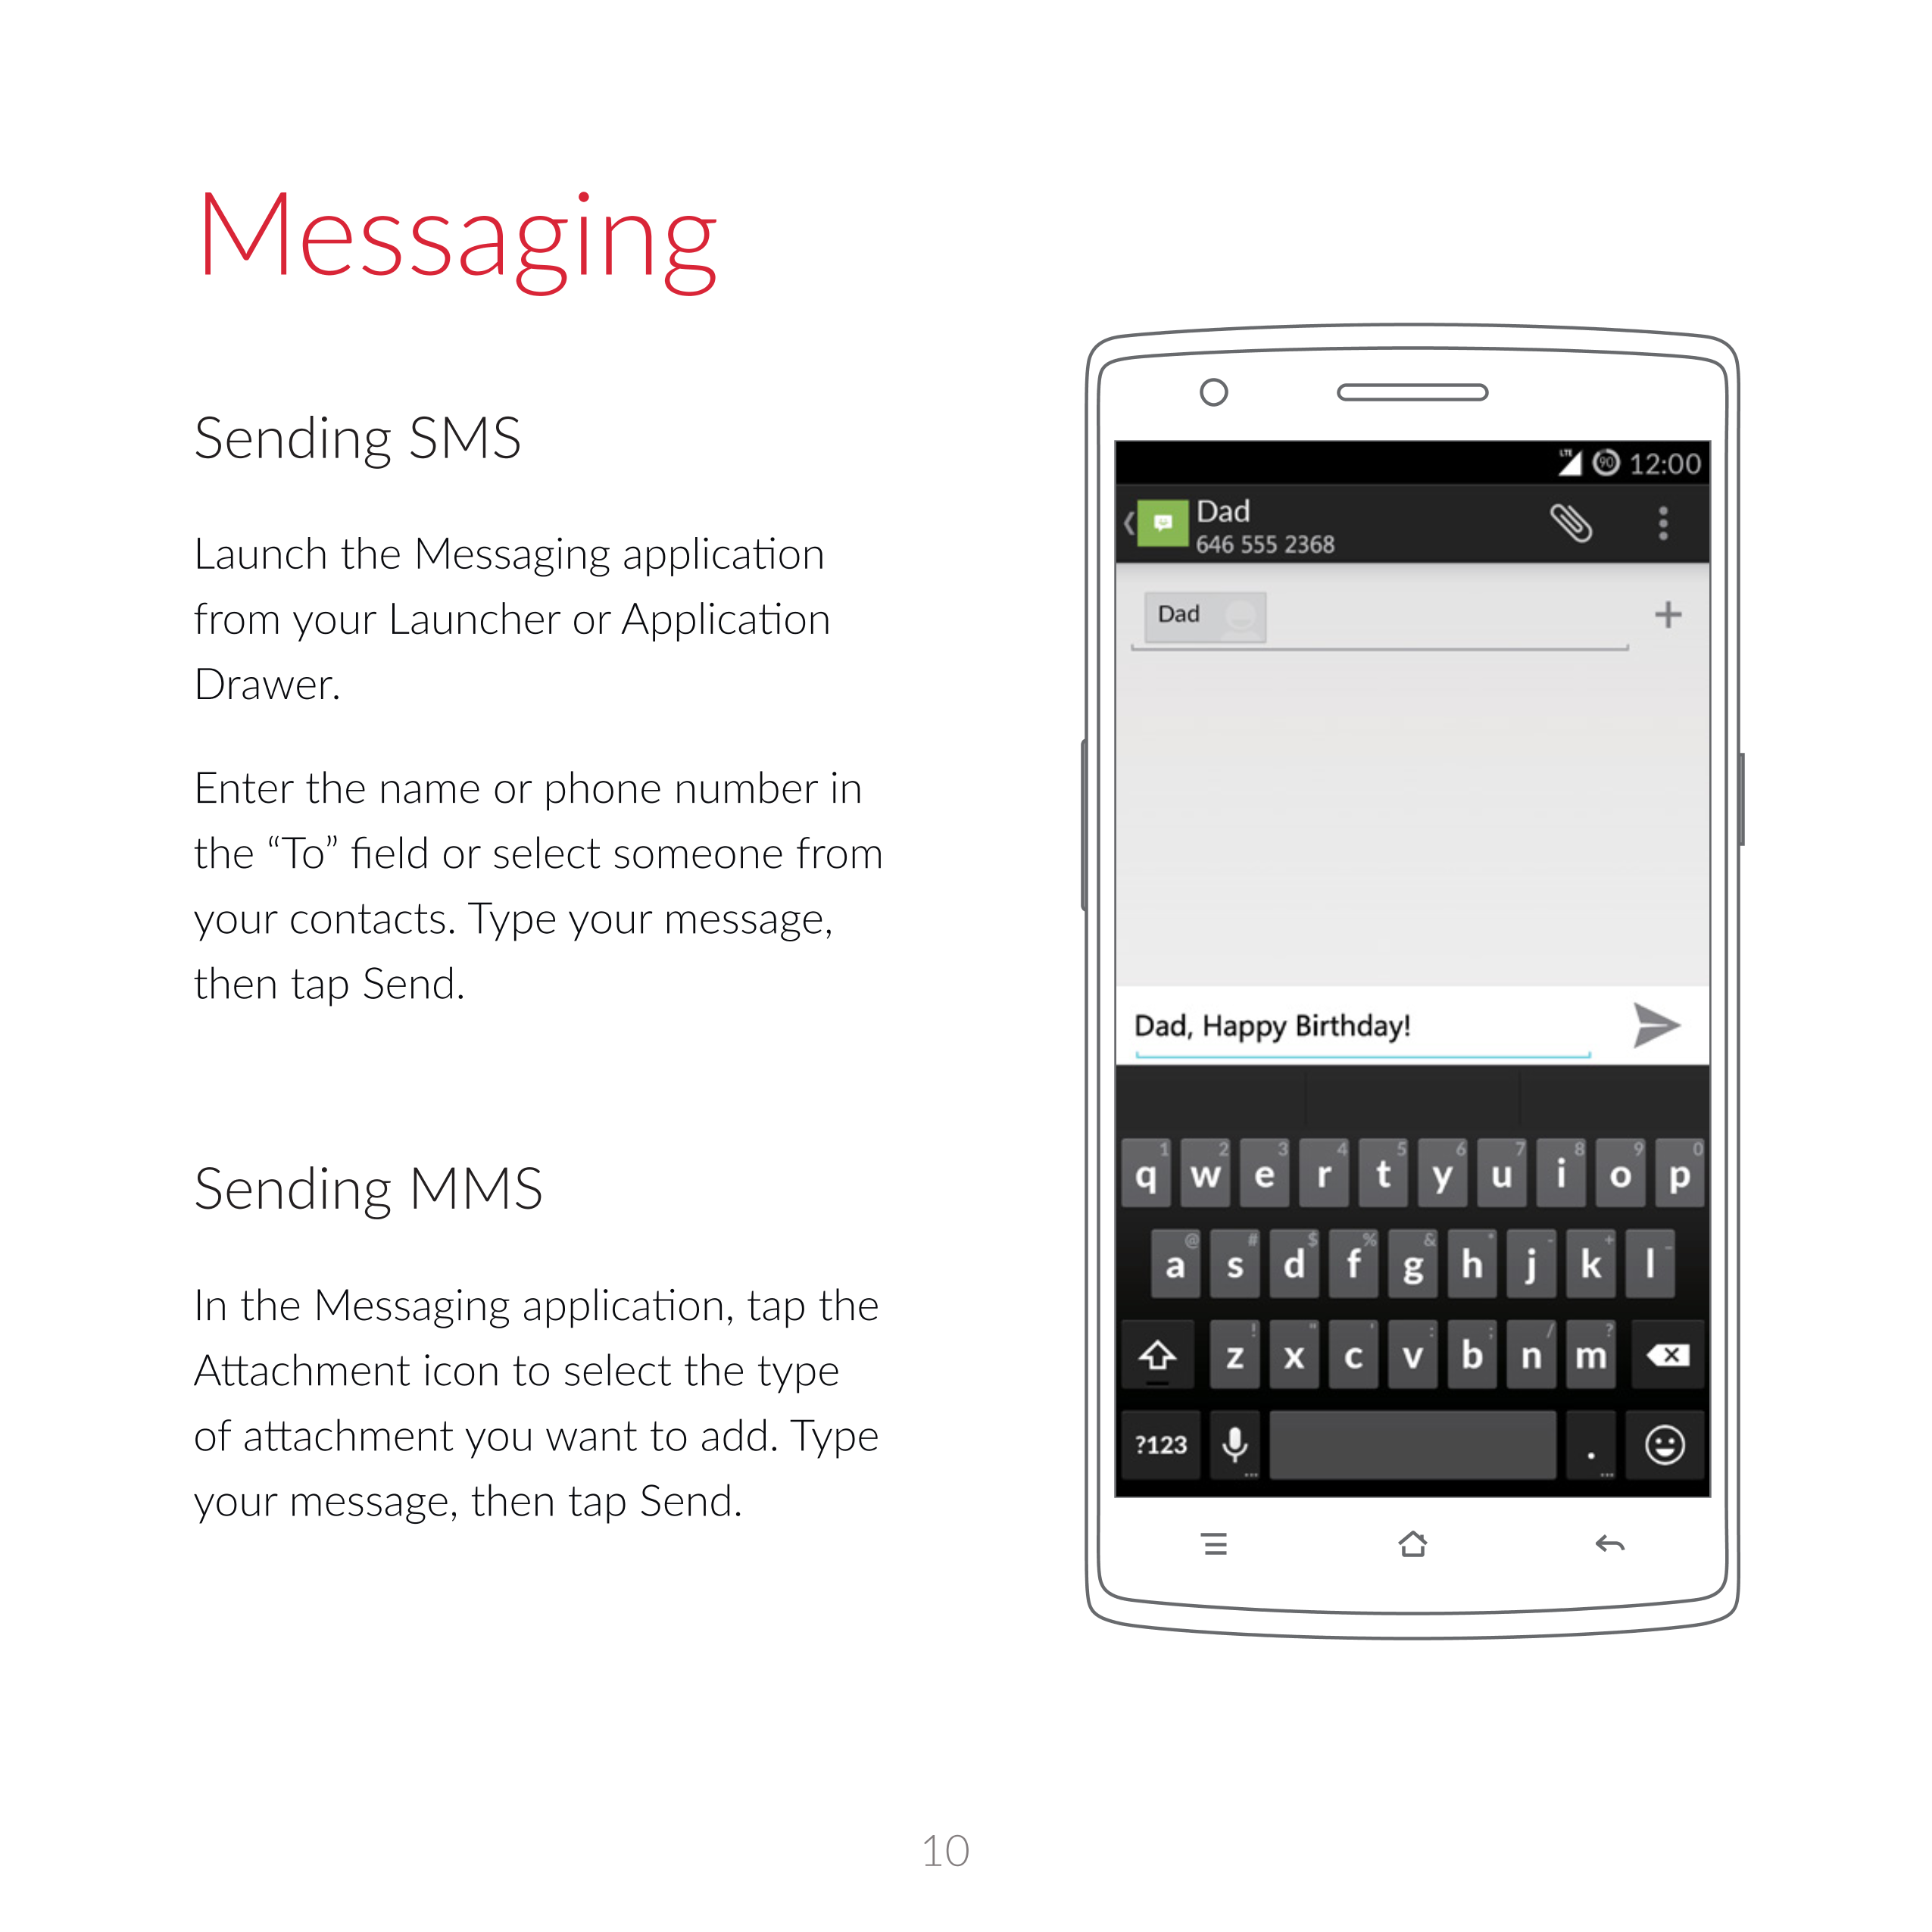 Messaging
Sending SMS
Drawer.
Enter the name or phone number in 
the “To” field or select someone from 
your  contacts.  Type  y